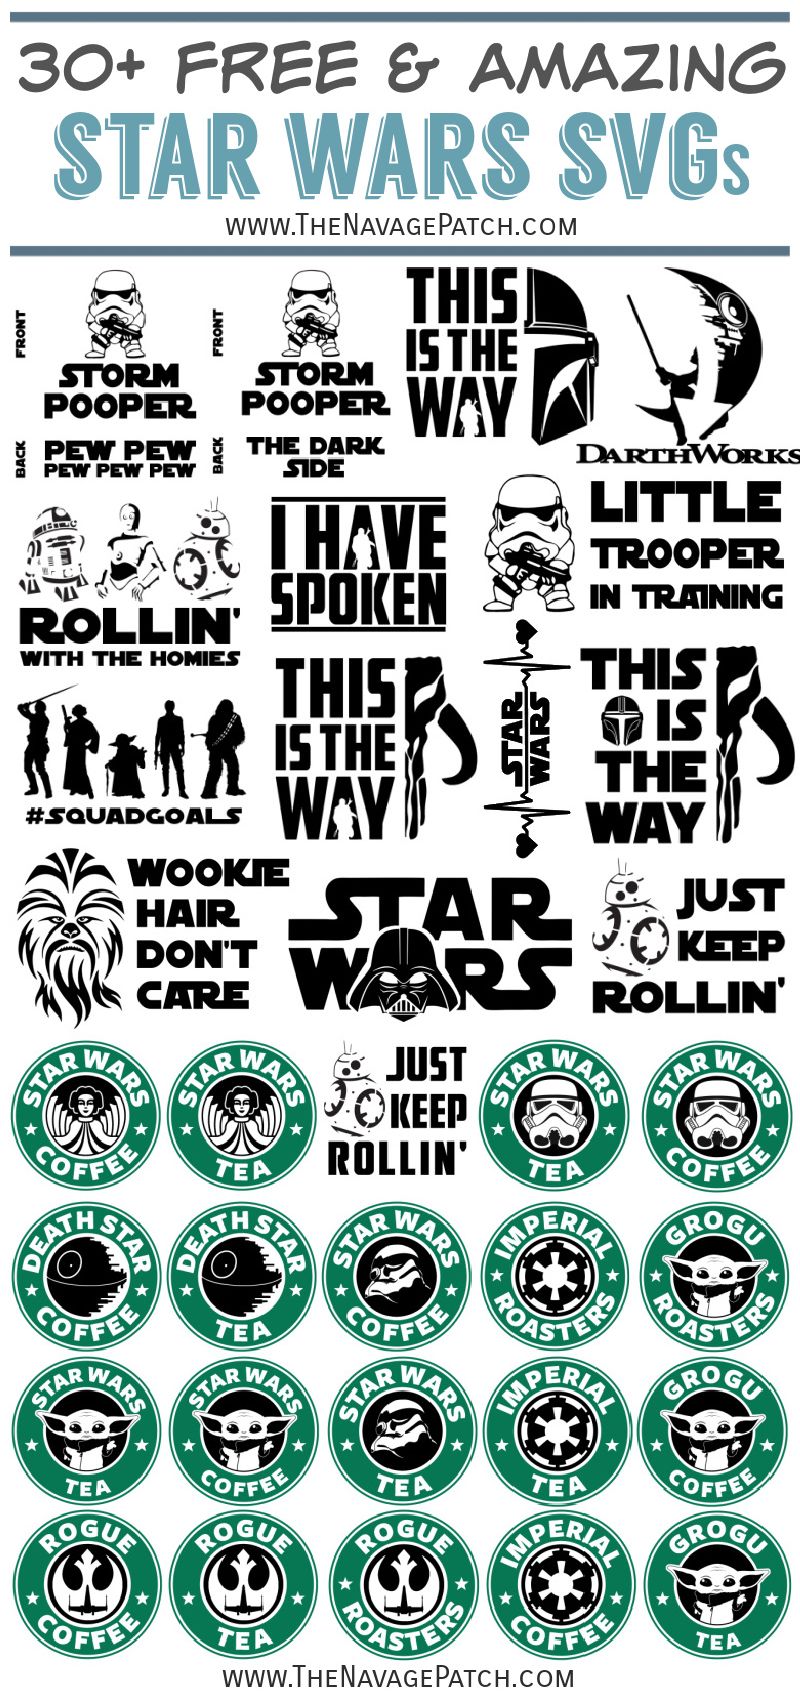 Free Star Wars SVGs - TheNavagePatch.com